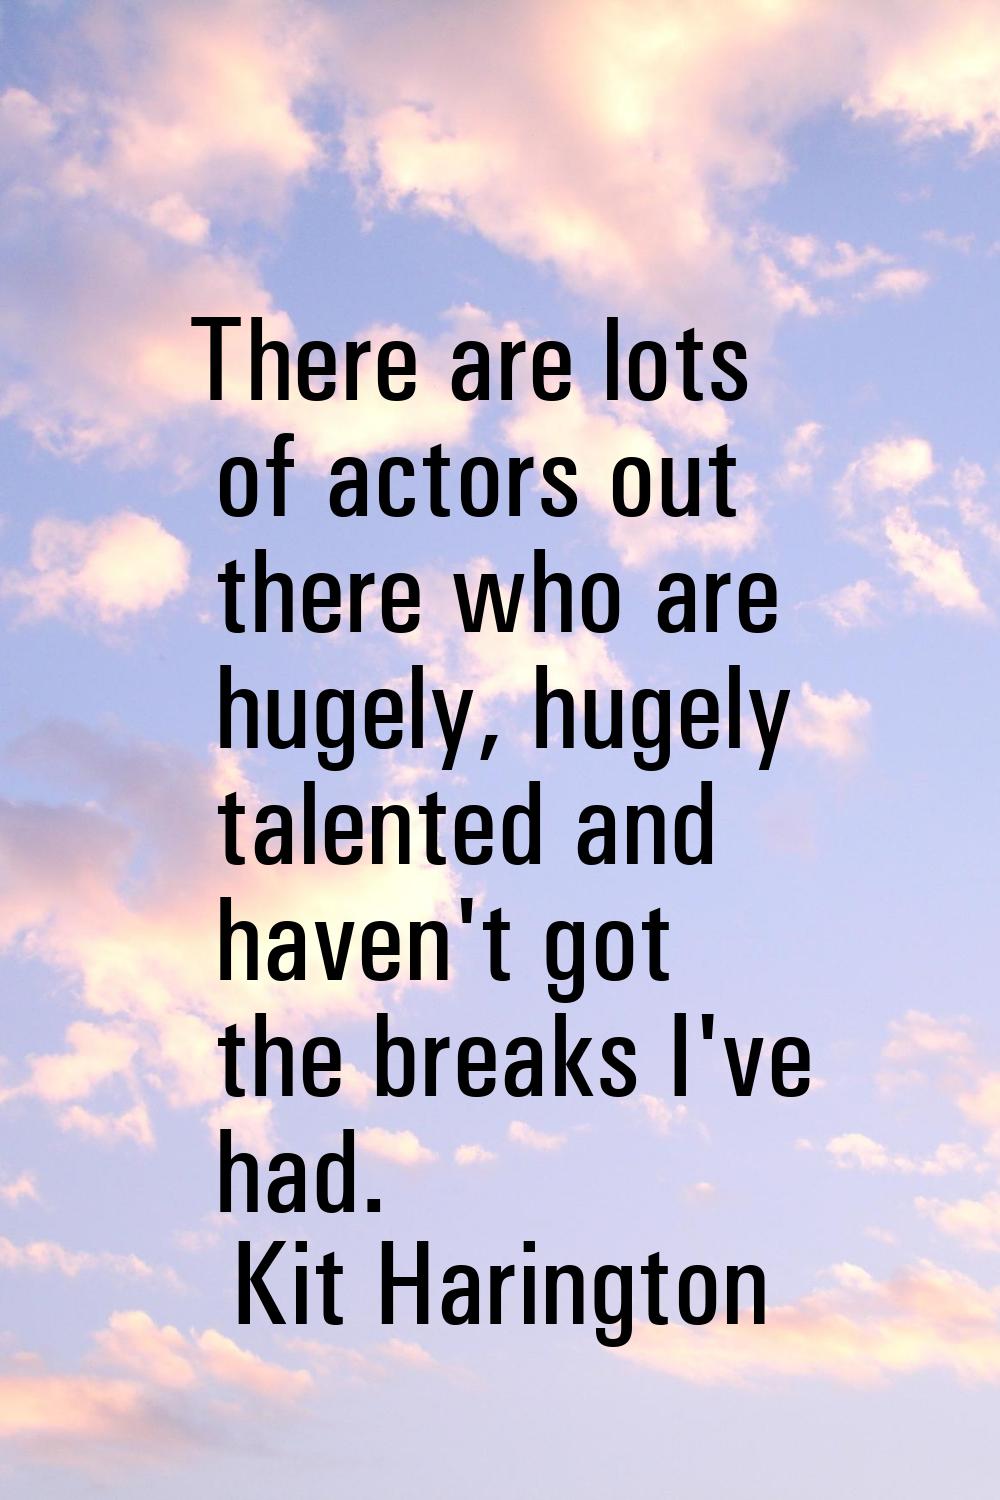 There are lots of actors out there who are hugely, hugely talented and haven't got the breaks I've 